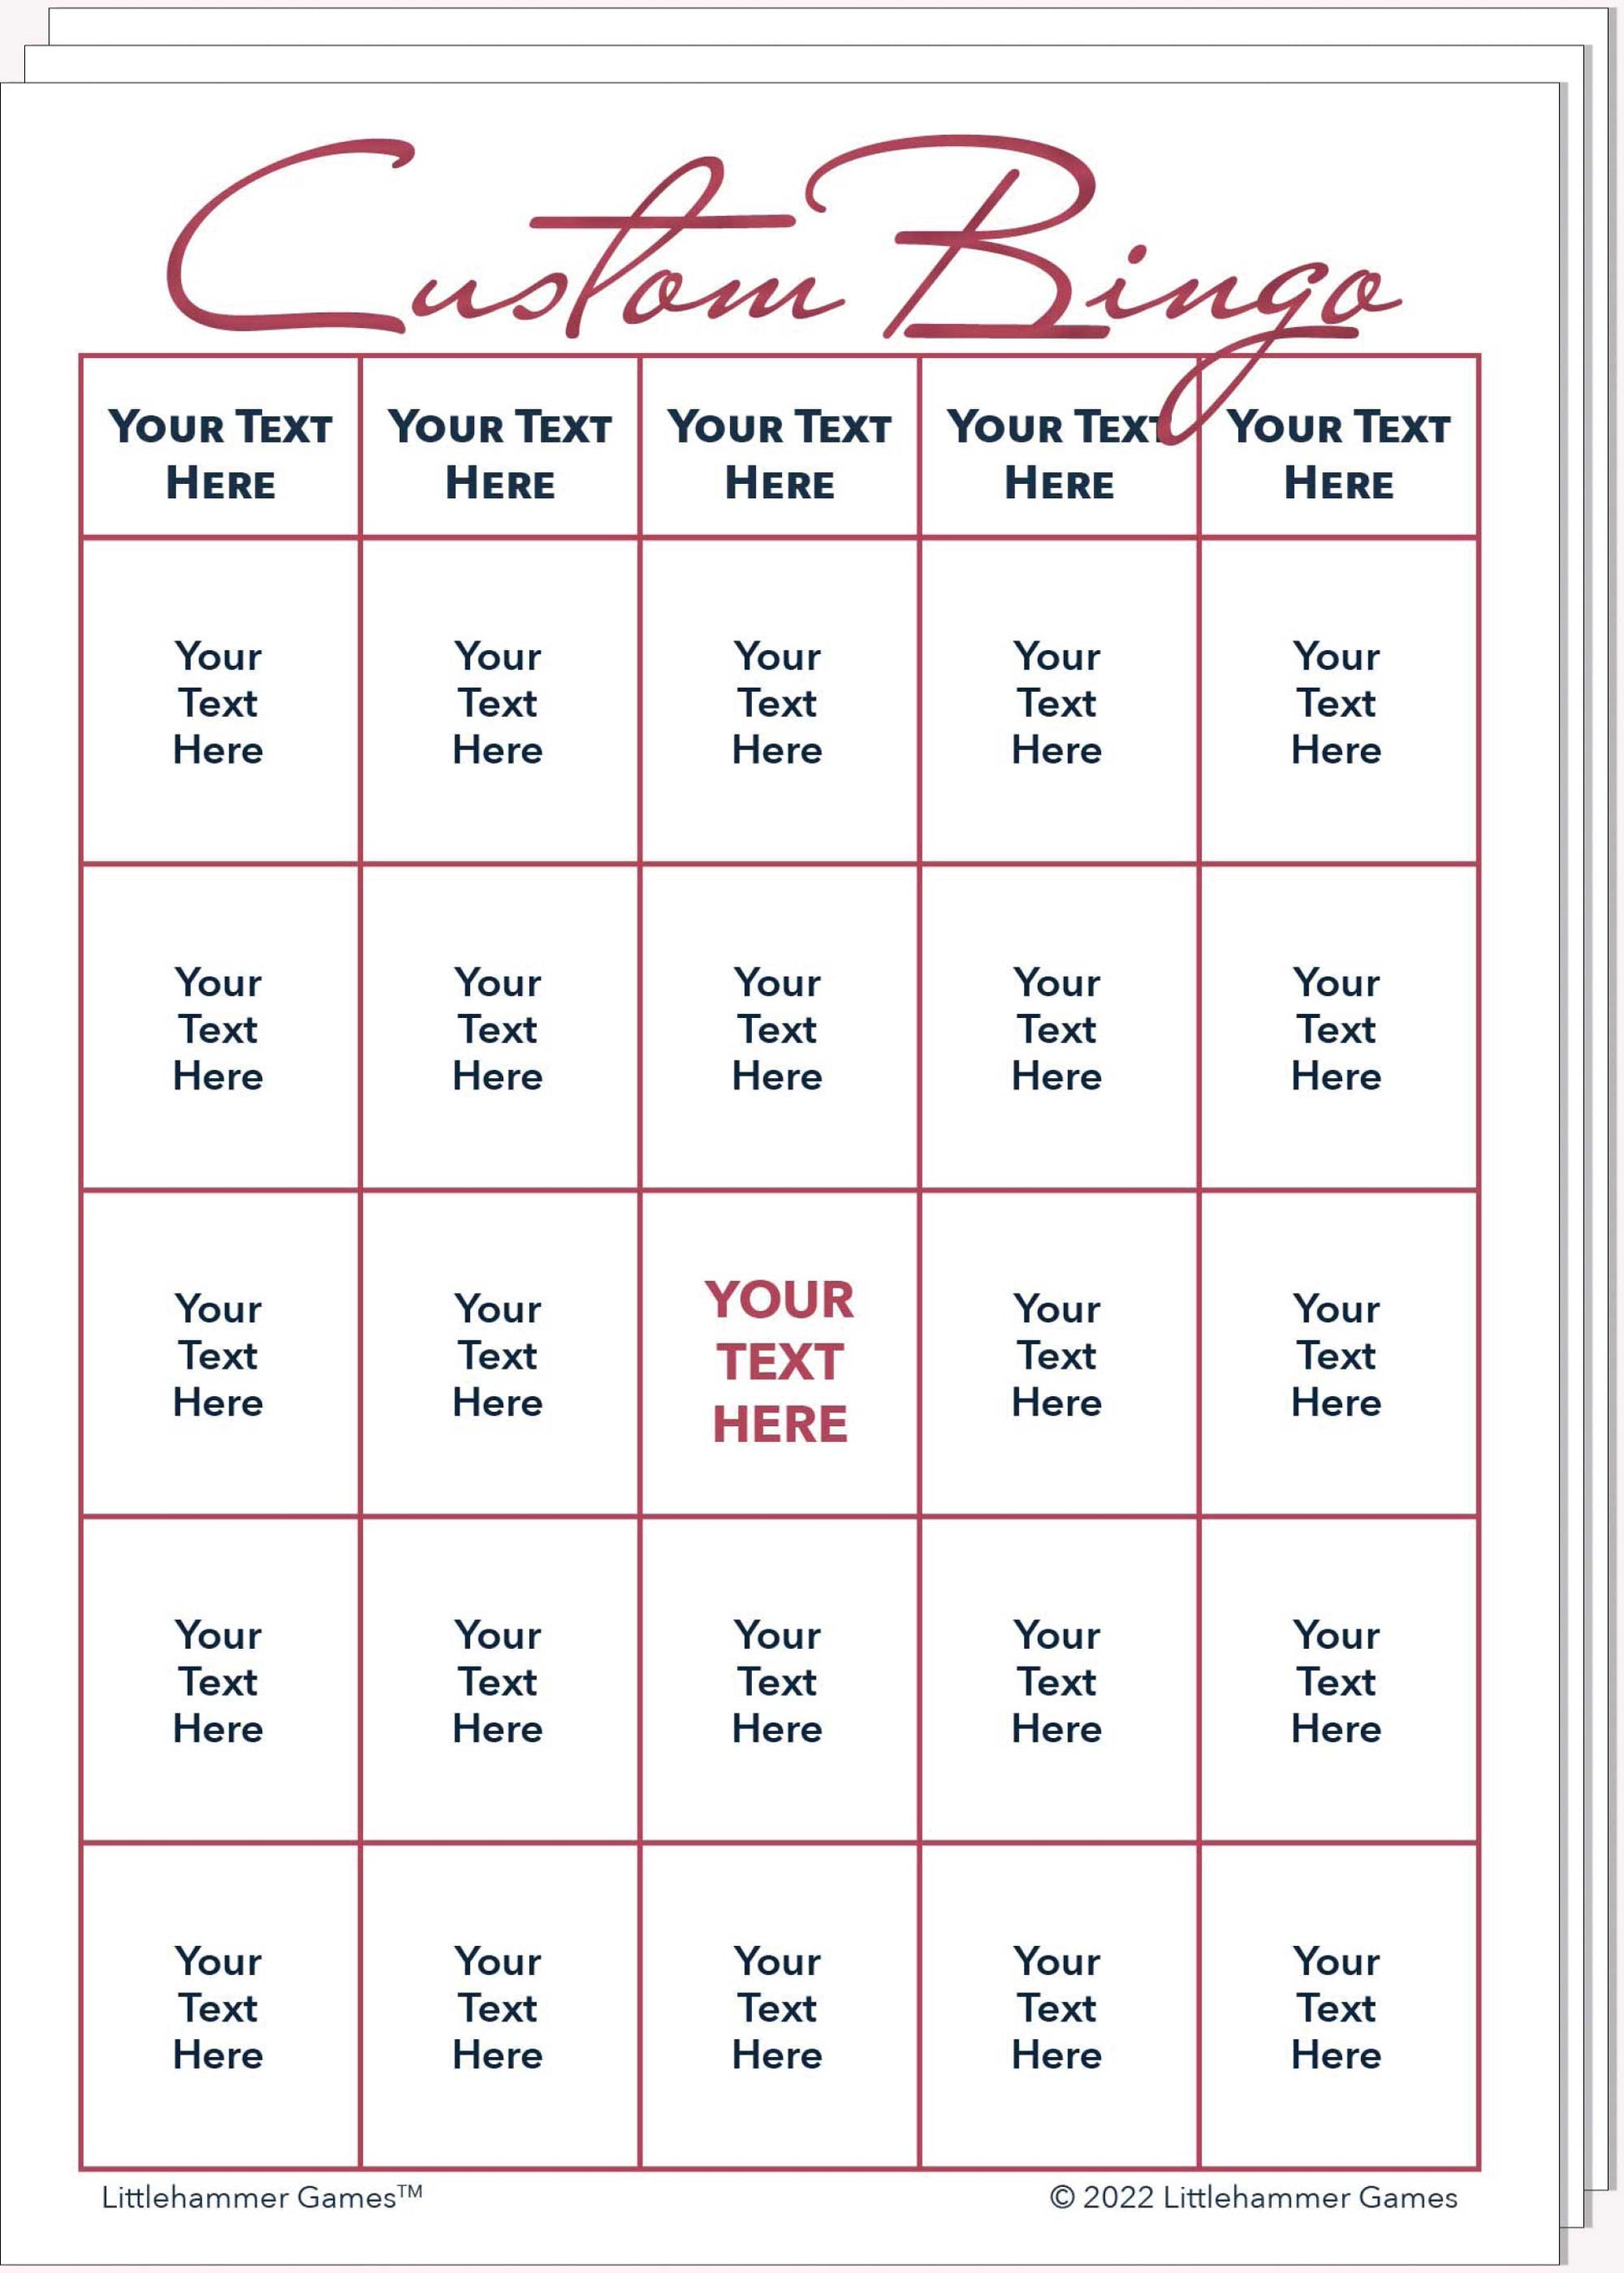 Stack of Custom Bingo game cards with rose gold text on a white background